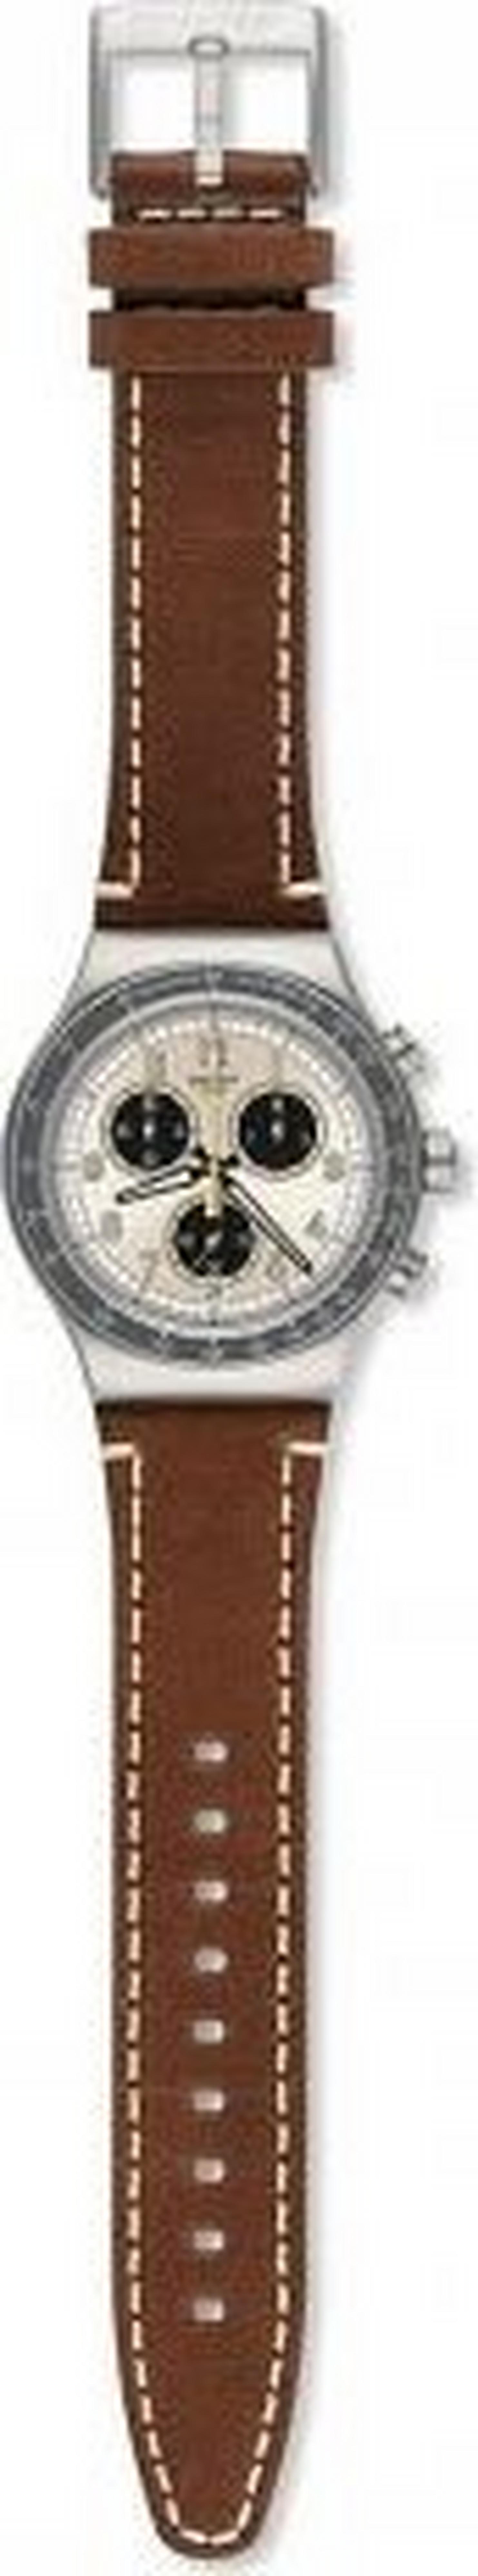 Swatch 43mm Chronograph Gents Leather Watch (SWAYVS455) - Brown